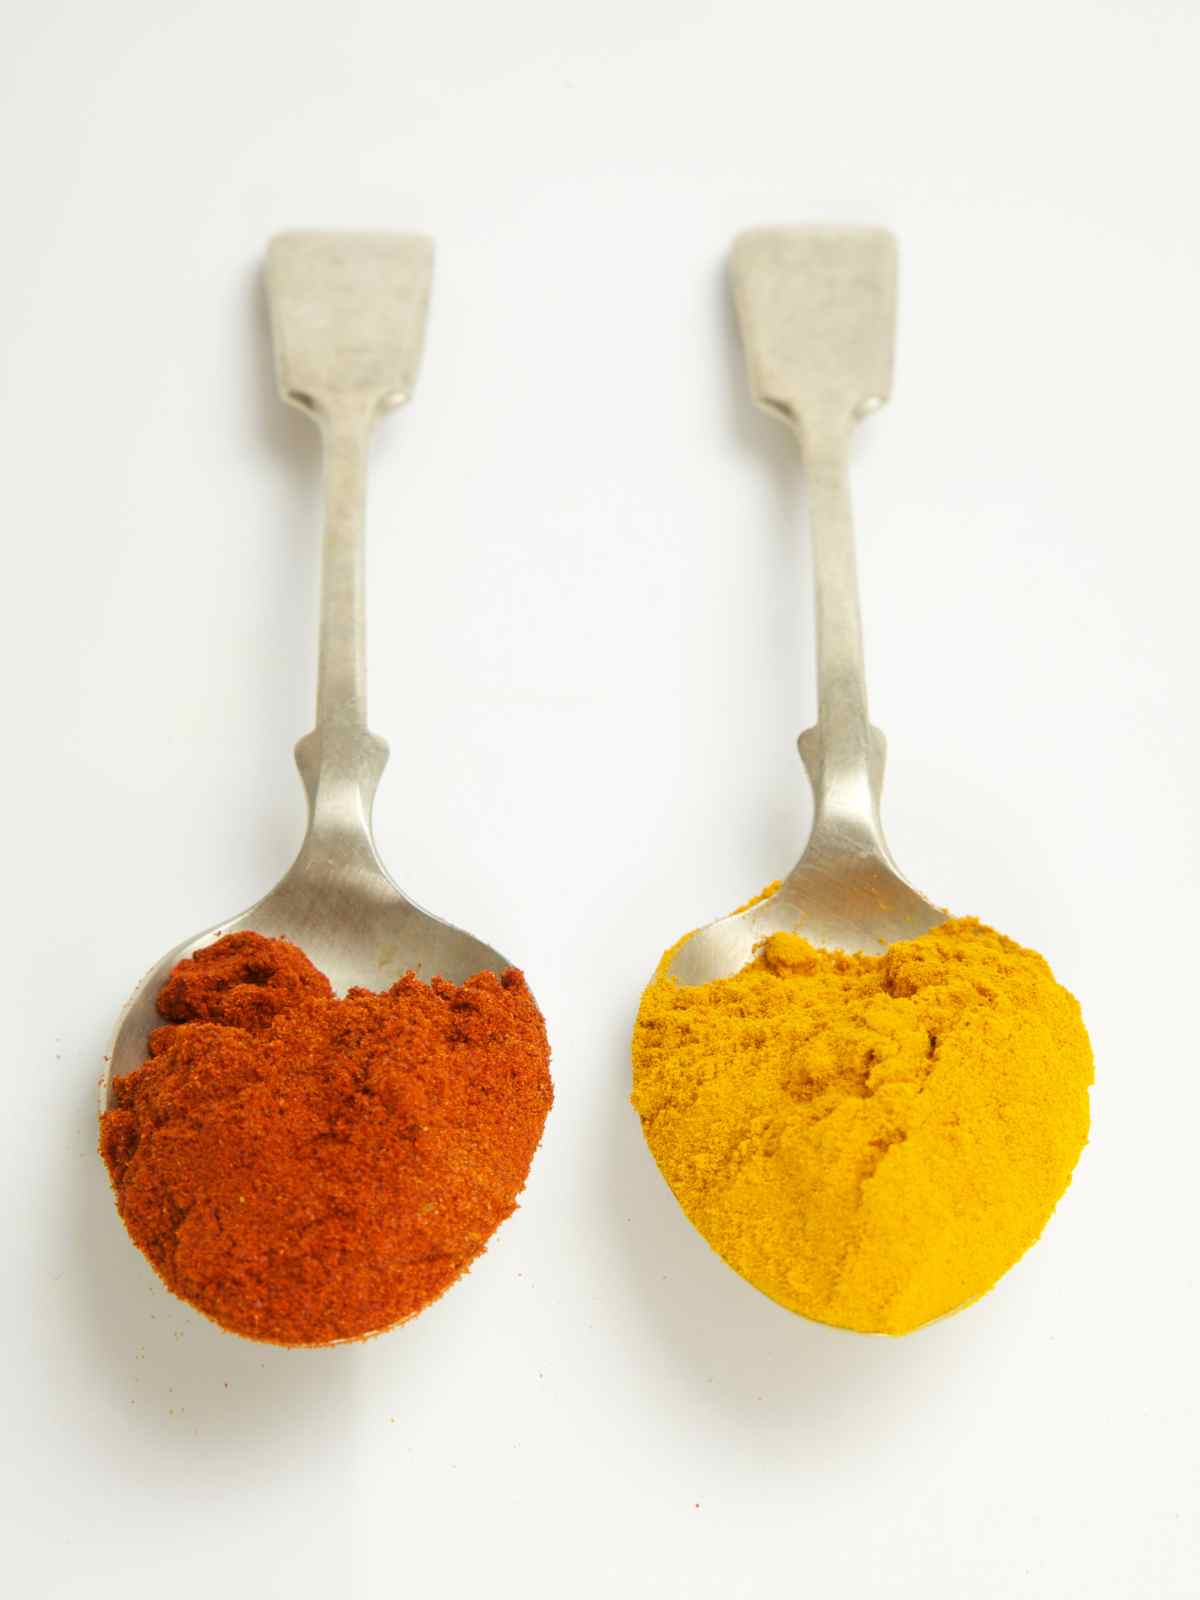 Spoon full of paprika powder and turmeric.